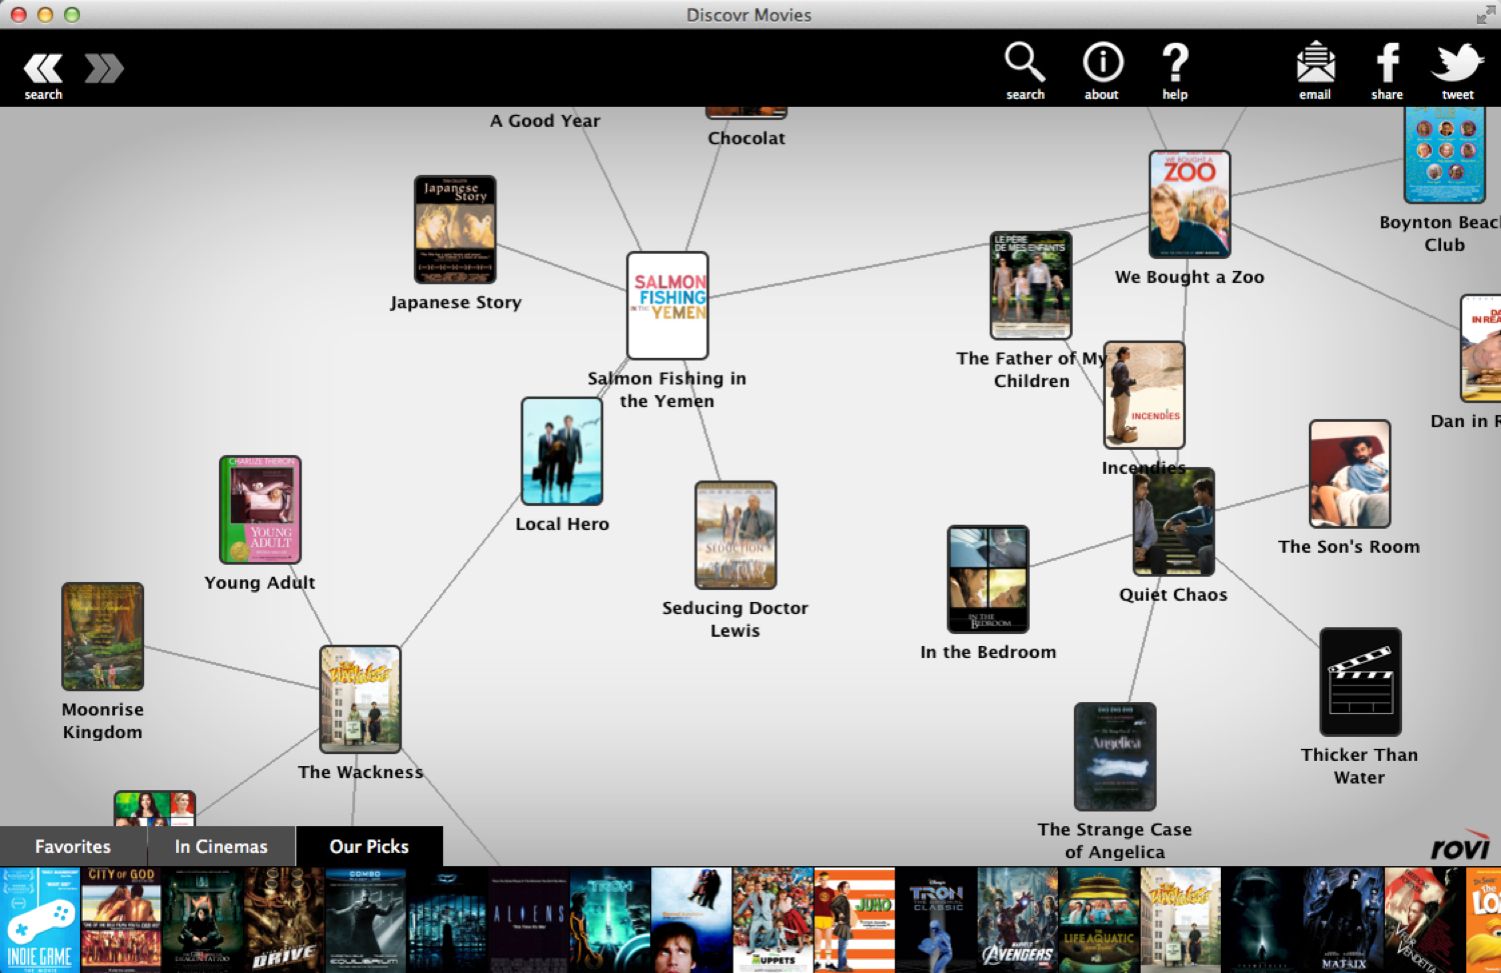 Discovr Movies - discover new movies 1.0 : Suggestion Web